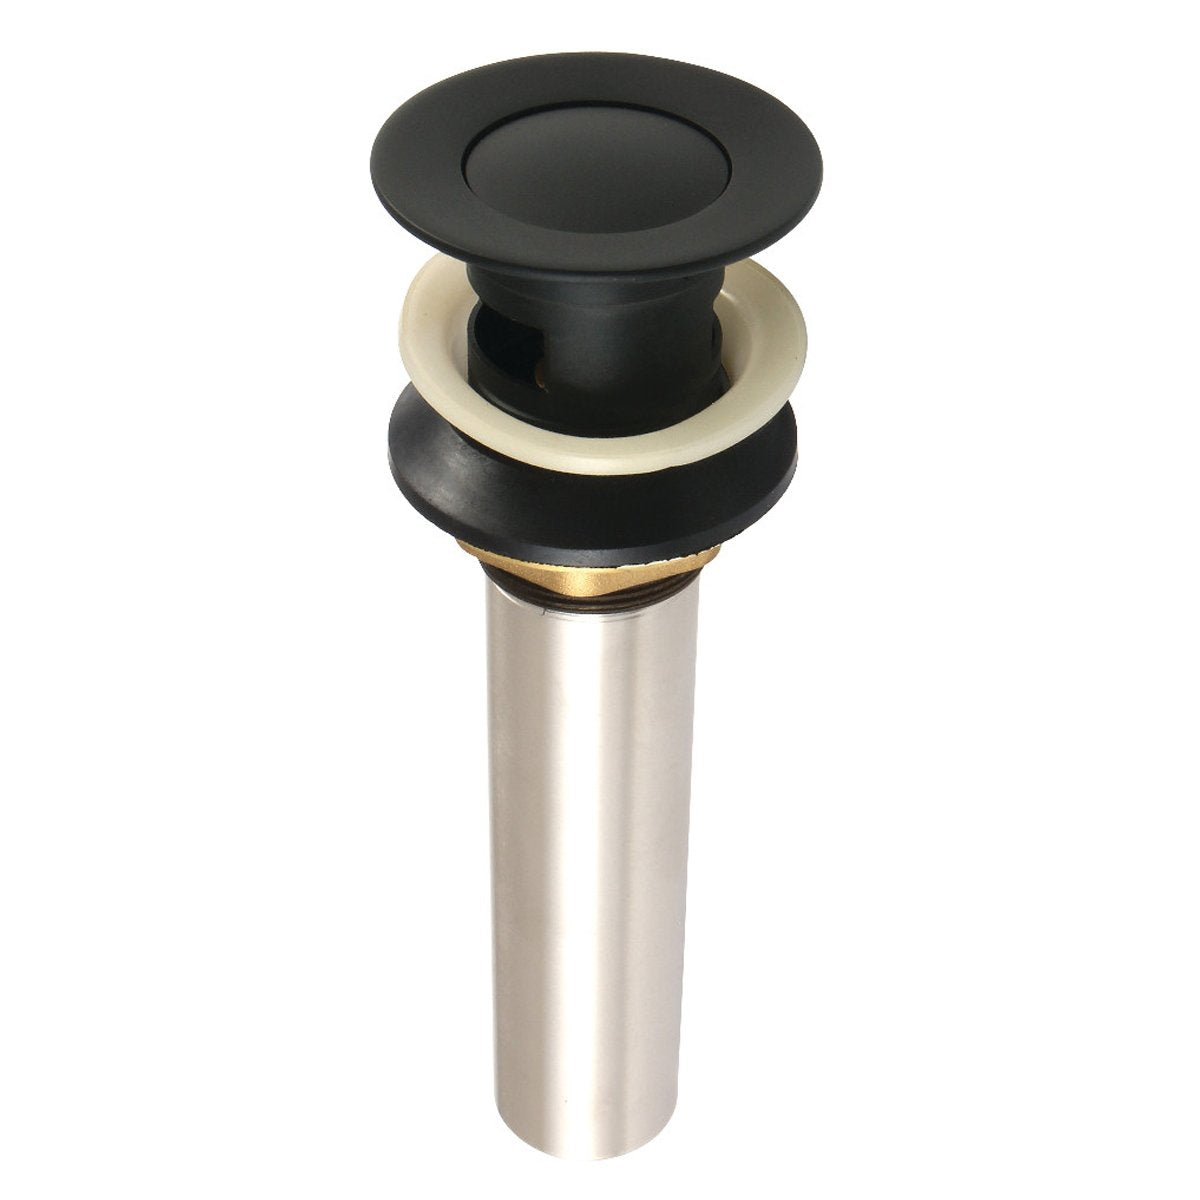 Kingston Brass Complement Push-Up Drain with Overflow